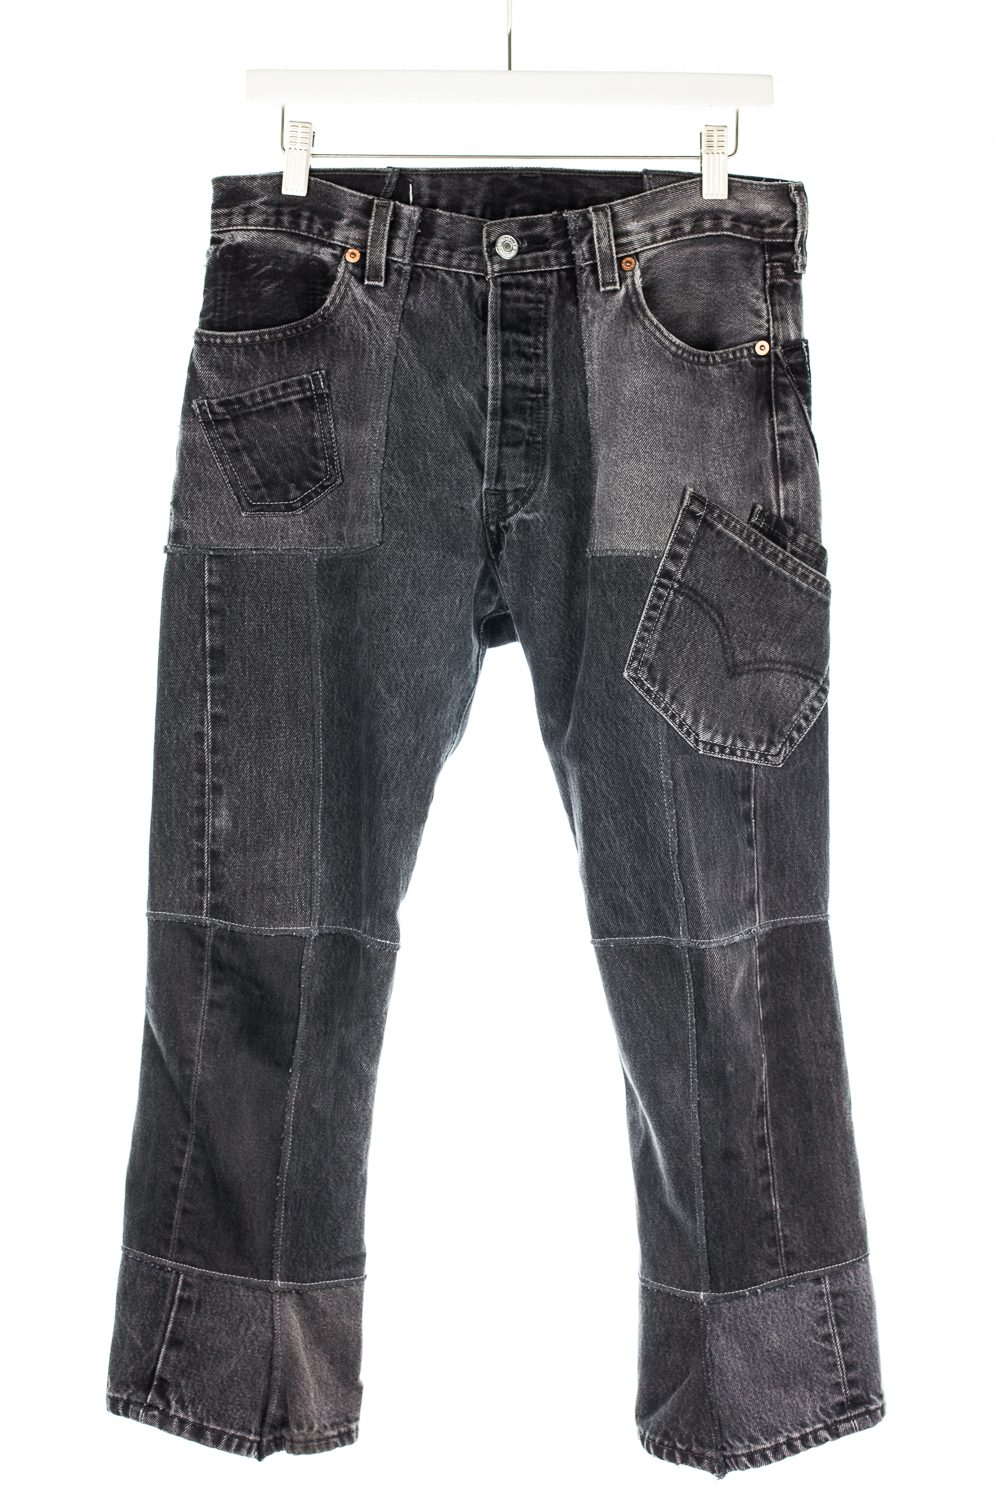 “The Jean” Reconstructed Patchwork Denim (Grey)